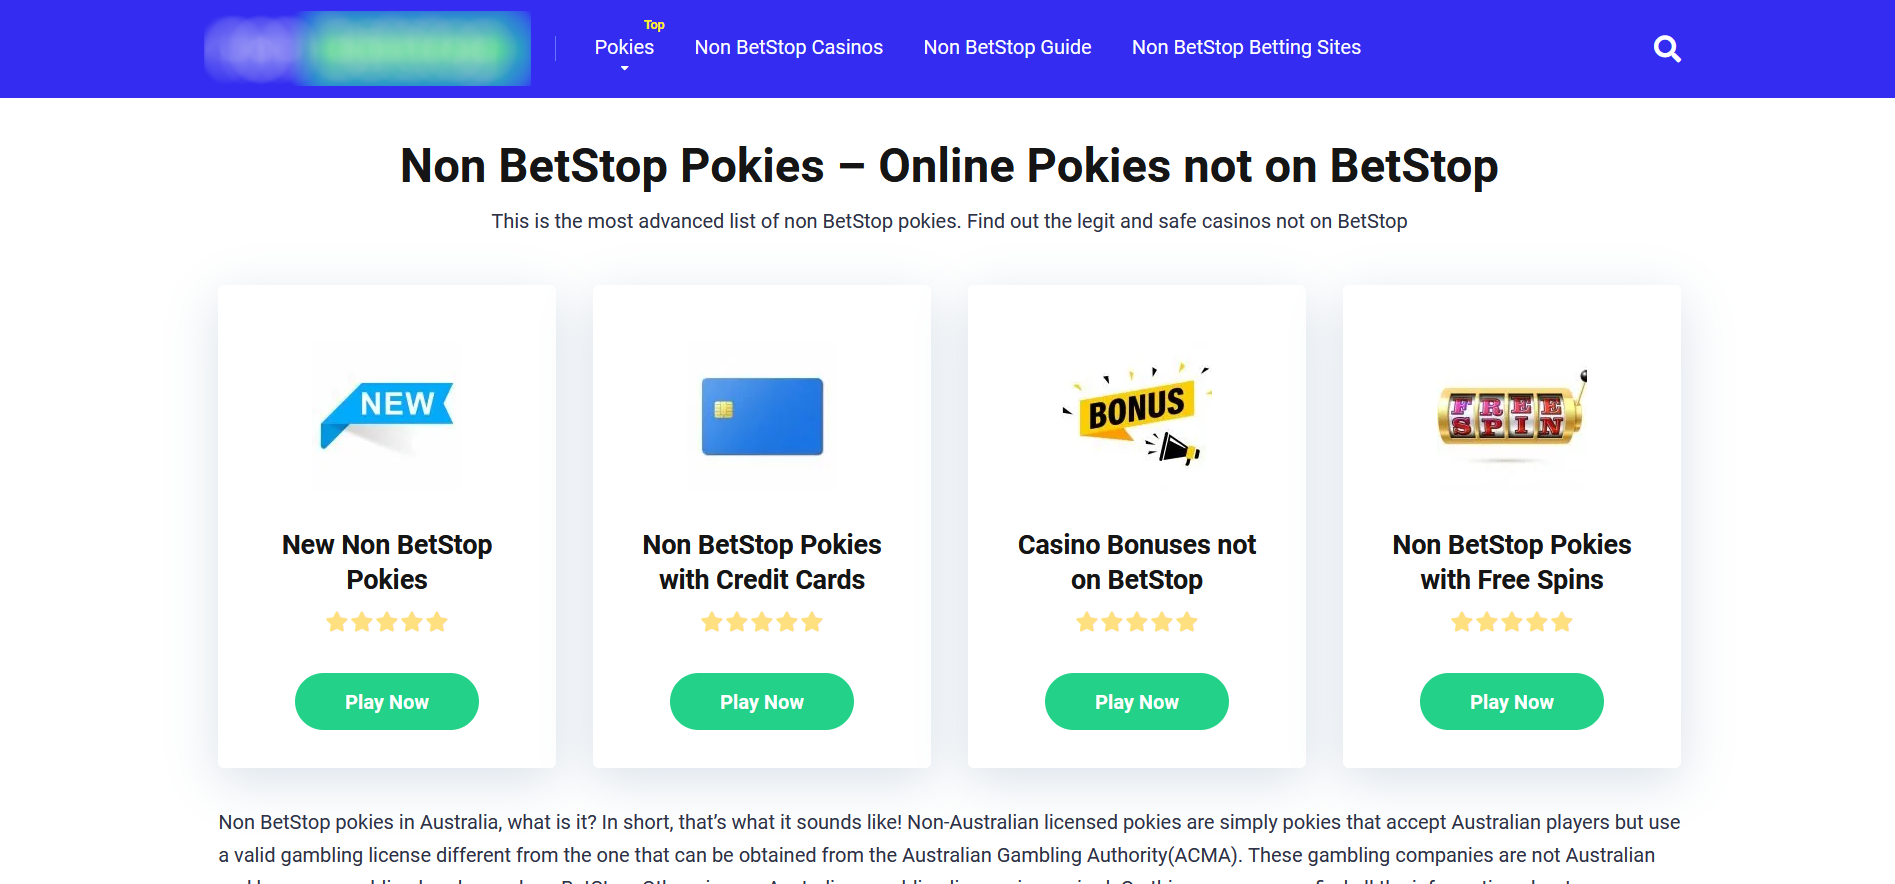 How To Make Your betting Look Amazing In 5 Days